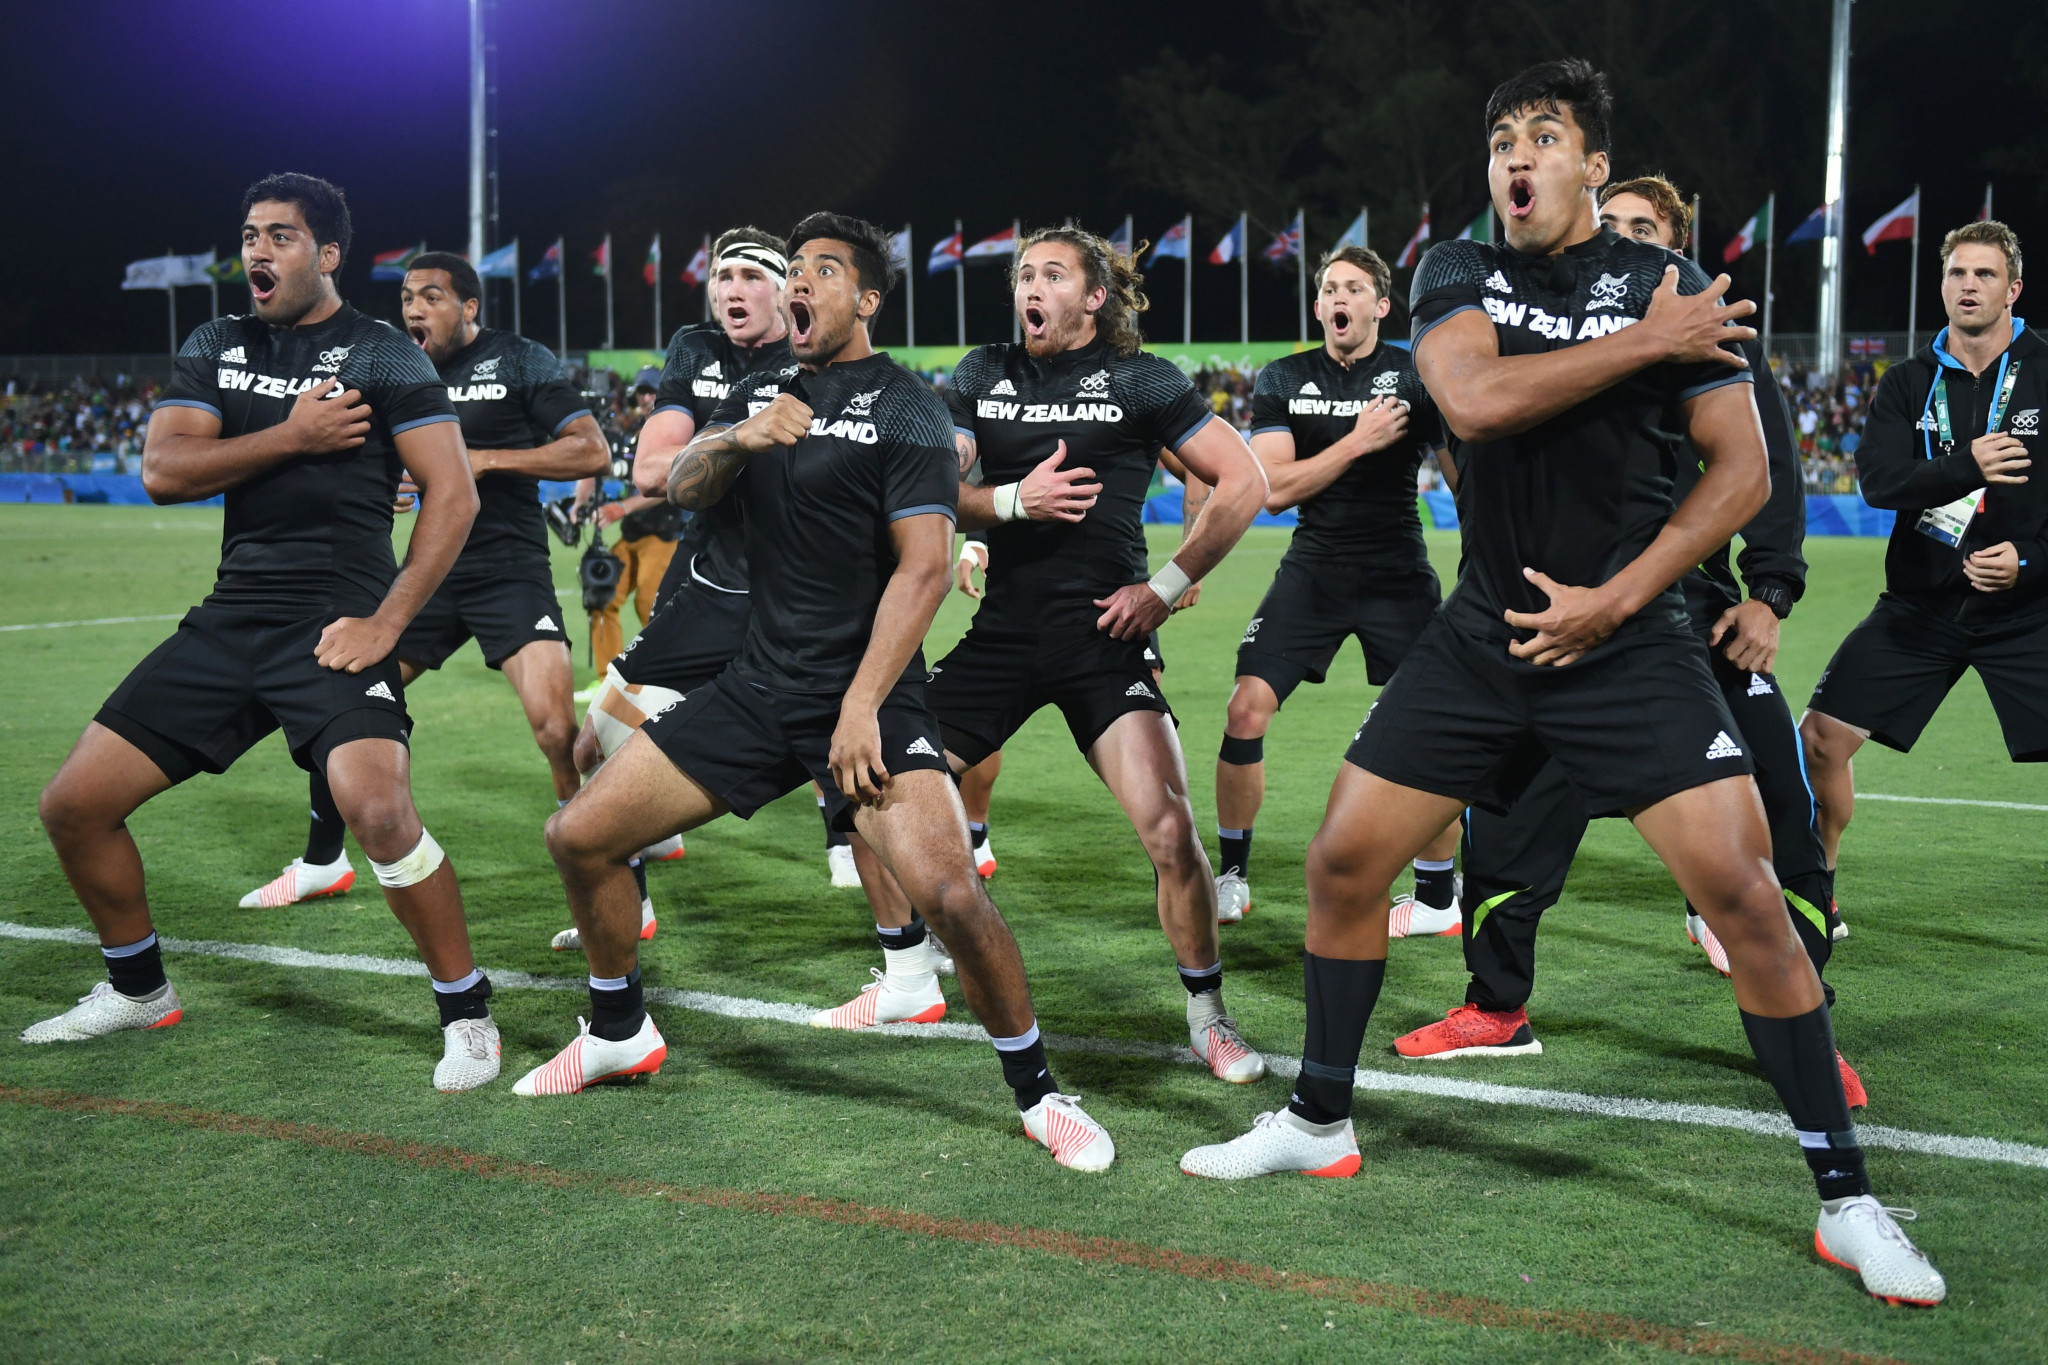 New Zealand's rugby sevens team for Gold Coast 2018 is unlikely to include members of the All Blacks squad ©Getty Images